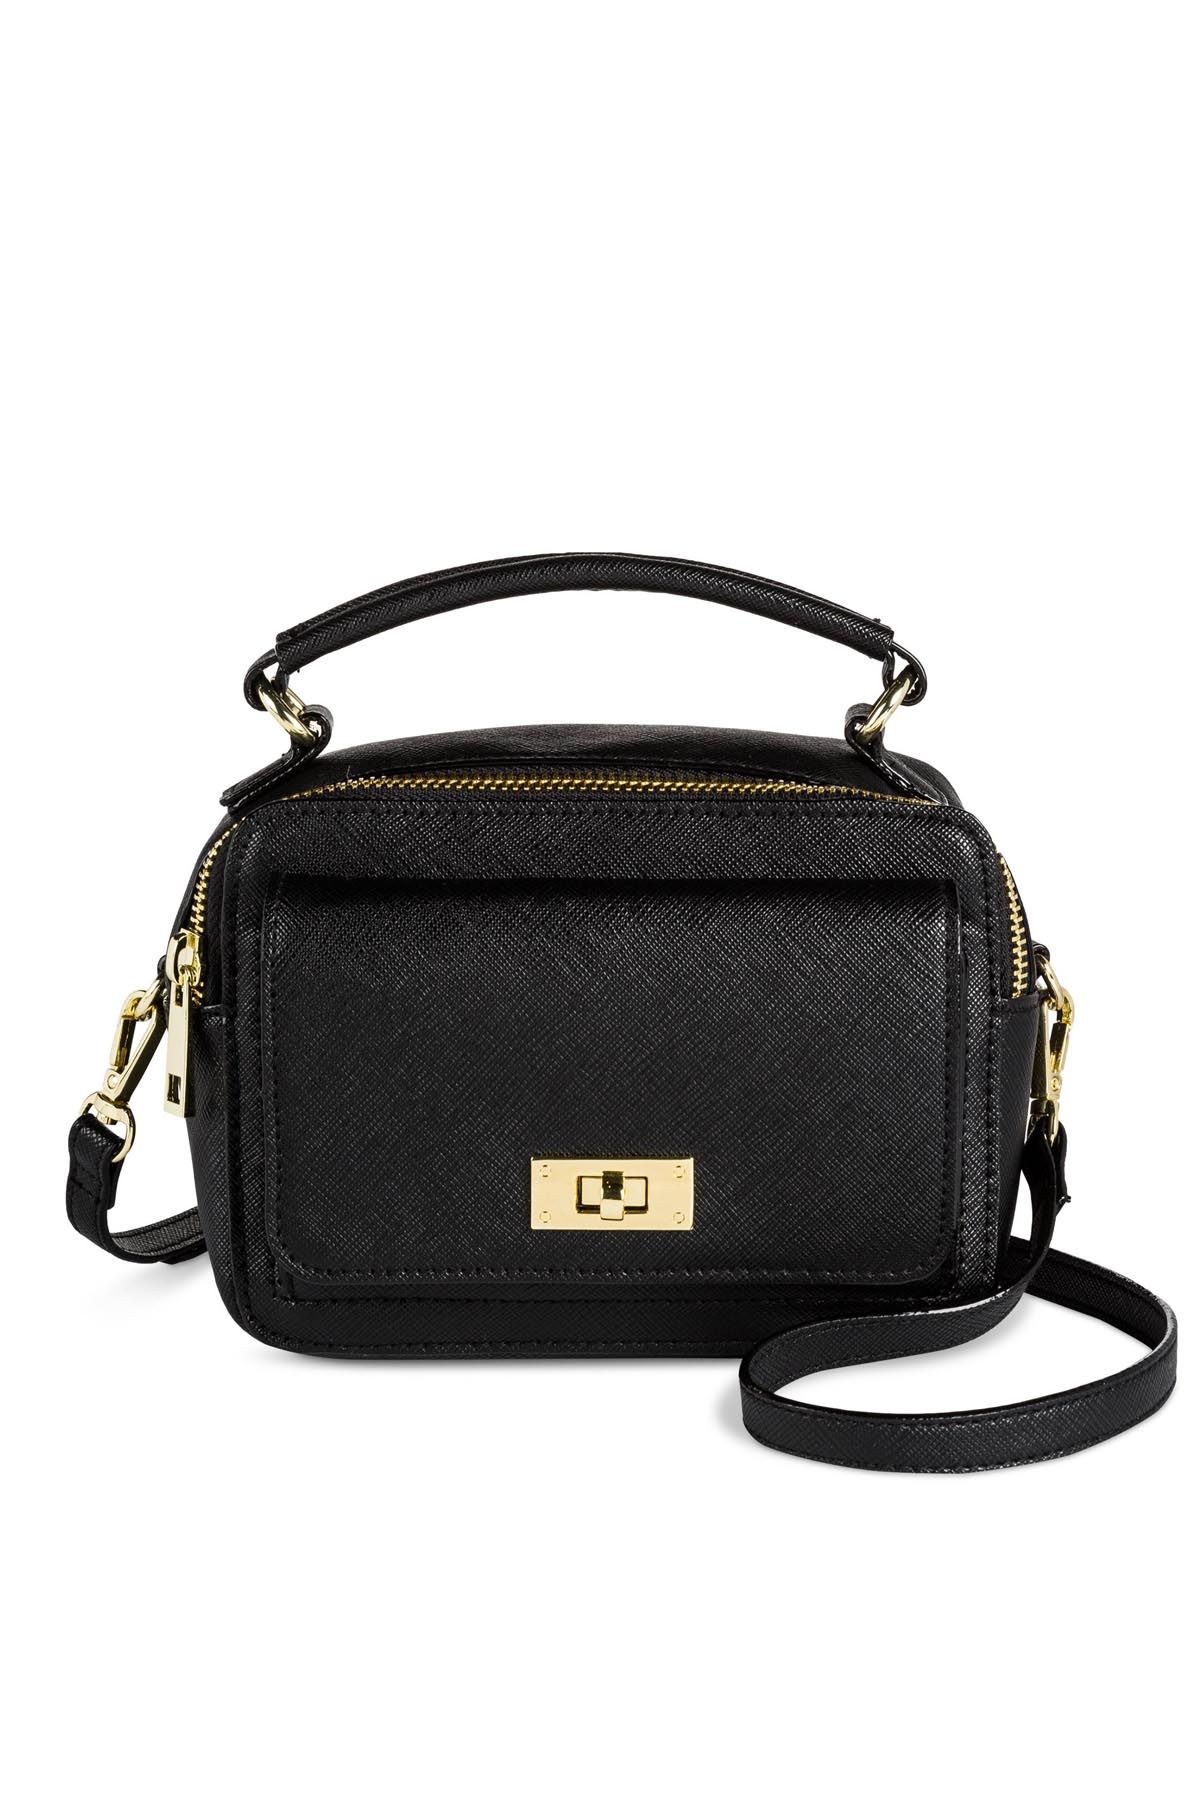 Shop Target's Chain Crossbody Handbag Strap in Clear | Shop the Tiny-Purse  Trend For Less With Target's $15 Micro Nano Bag | POPSUGAR Fashion UK Photo  10